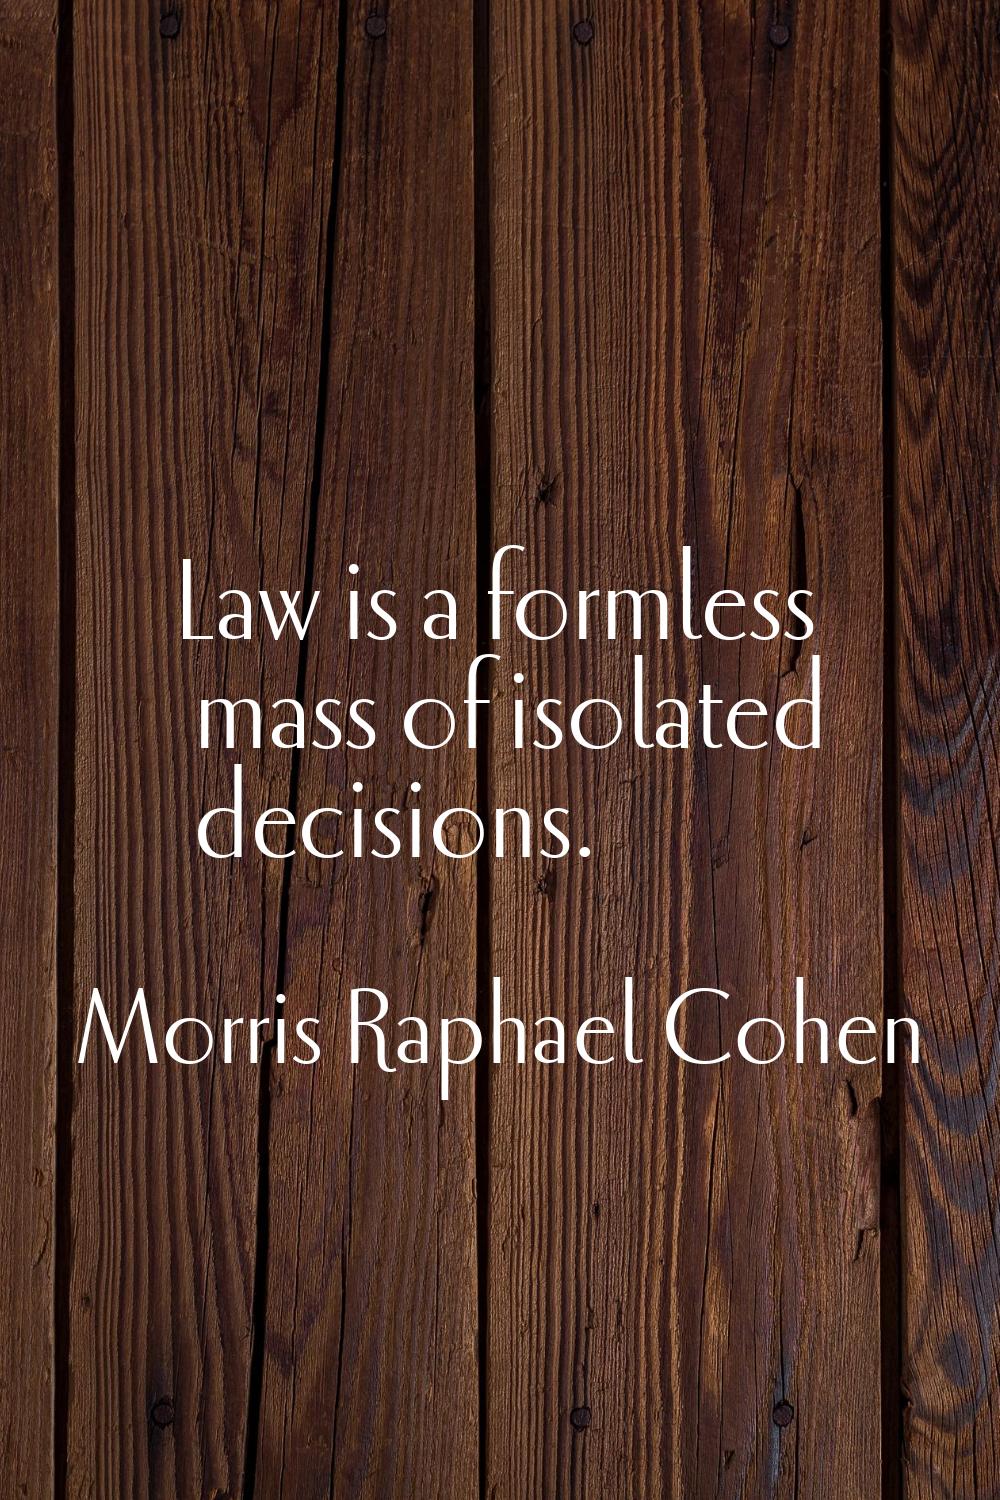 Law is a formless mass of isolated decisions.